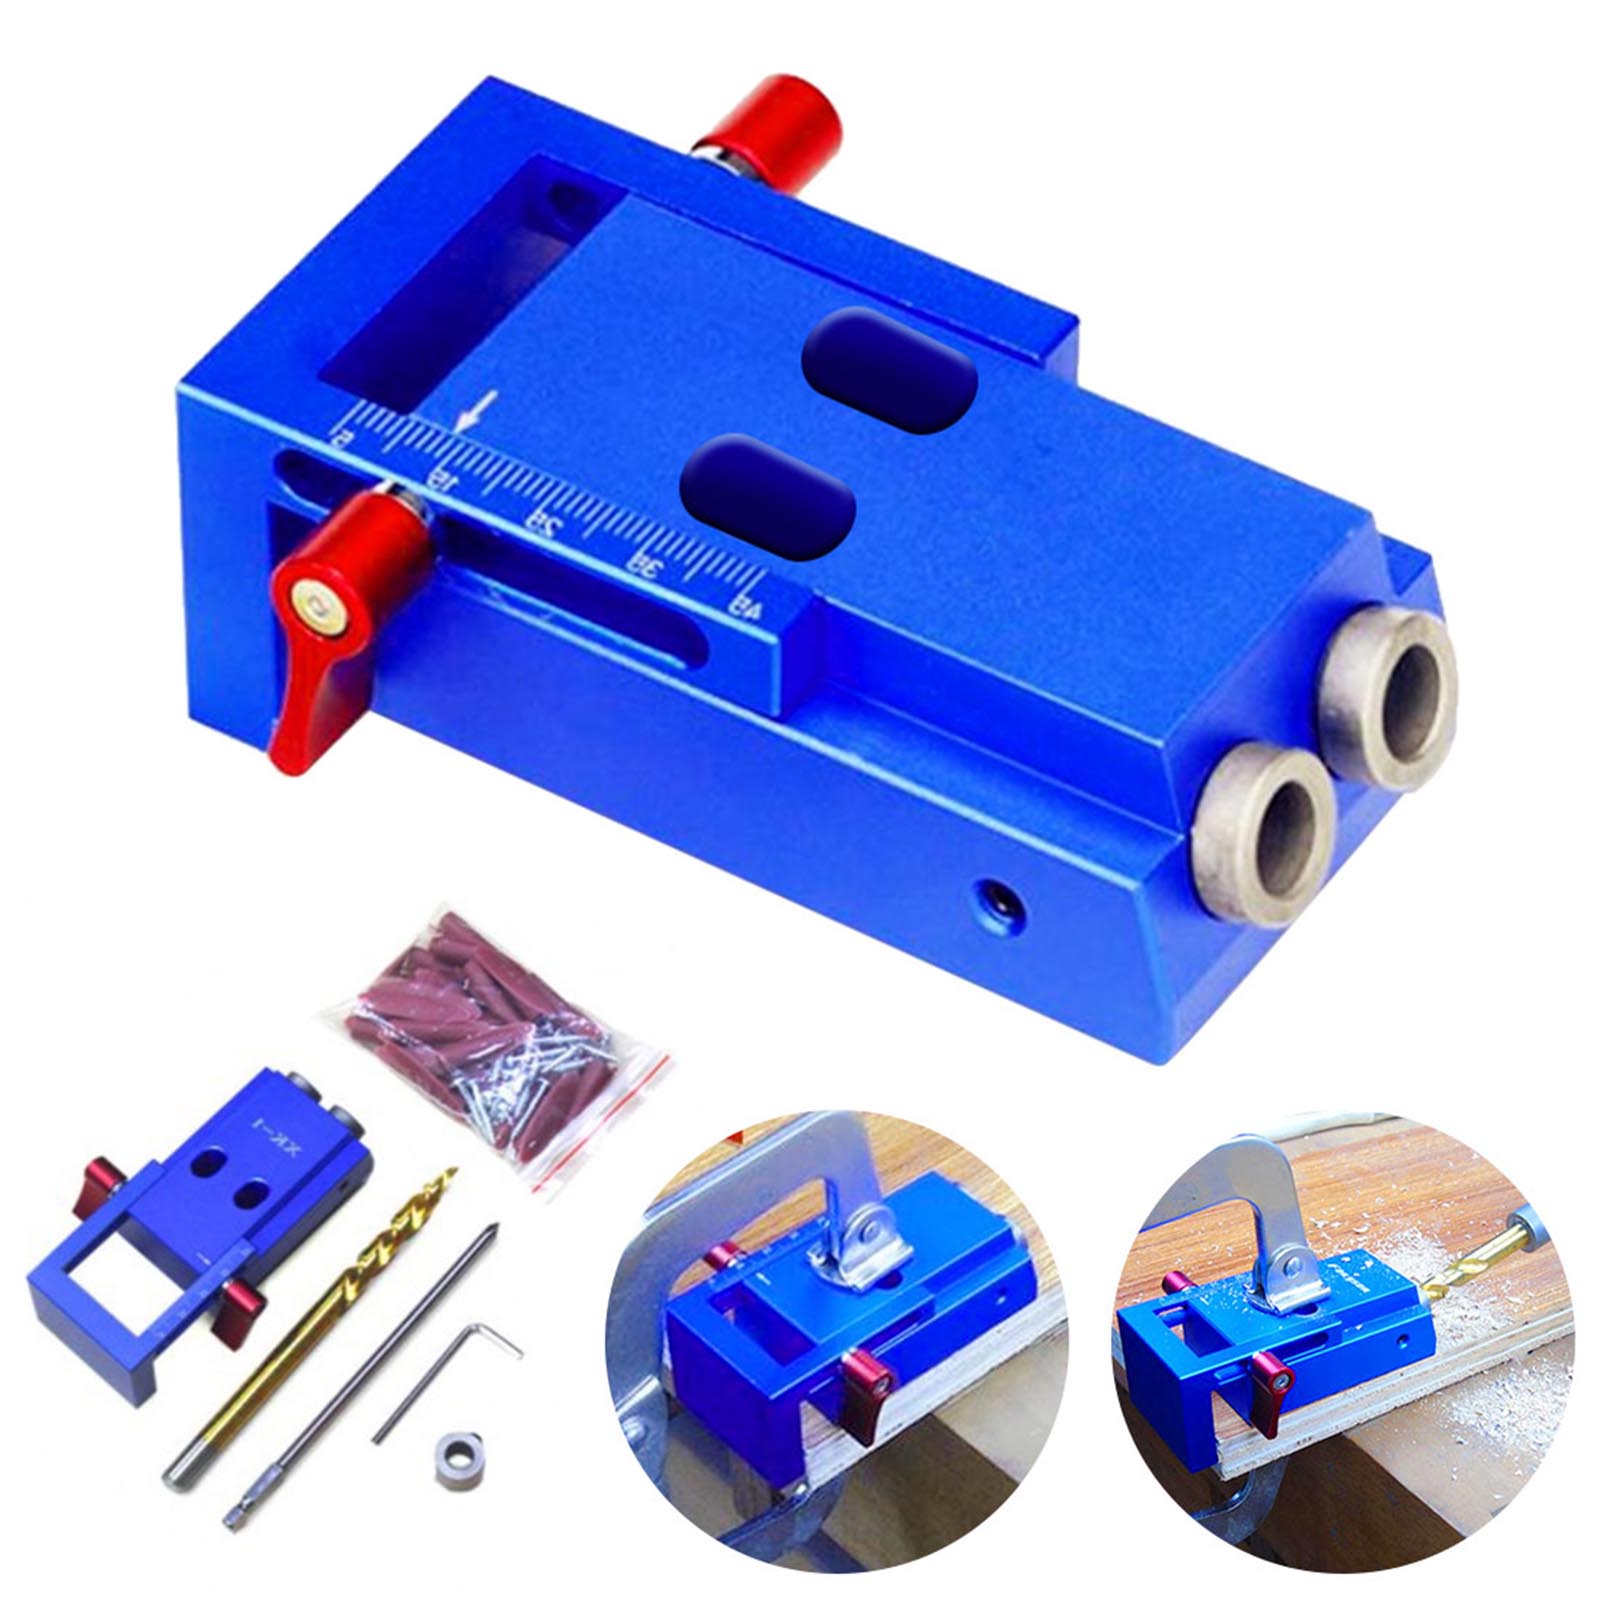 Pocket Hole Jig Kit 6/8/10mm Drive Adapter for Woodworking Angle Drilling Holes Guide Dowel Jig Wood Tools with PH2 Screwdrivers